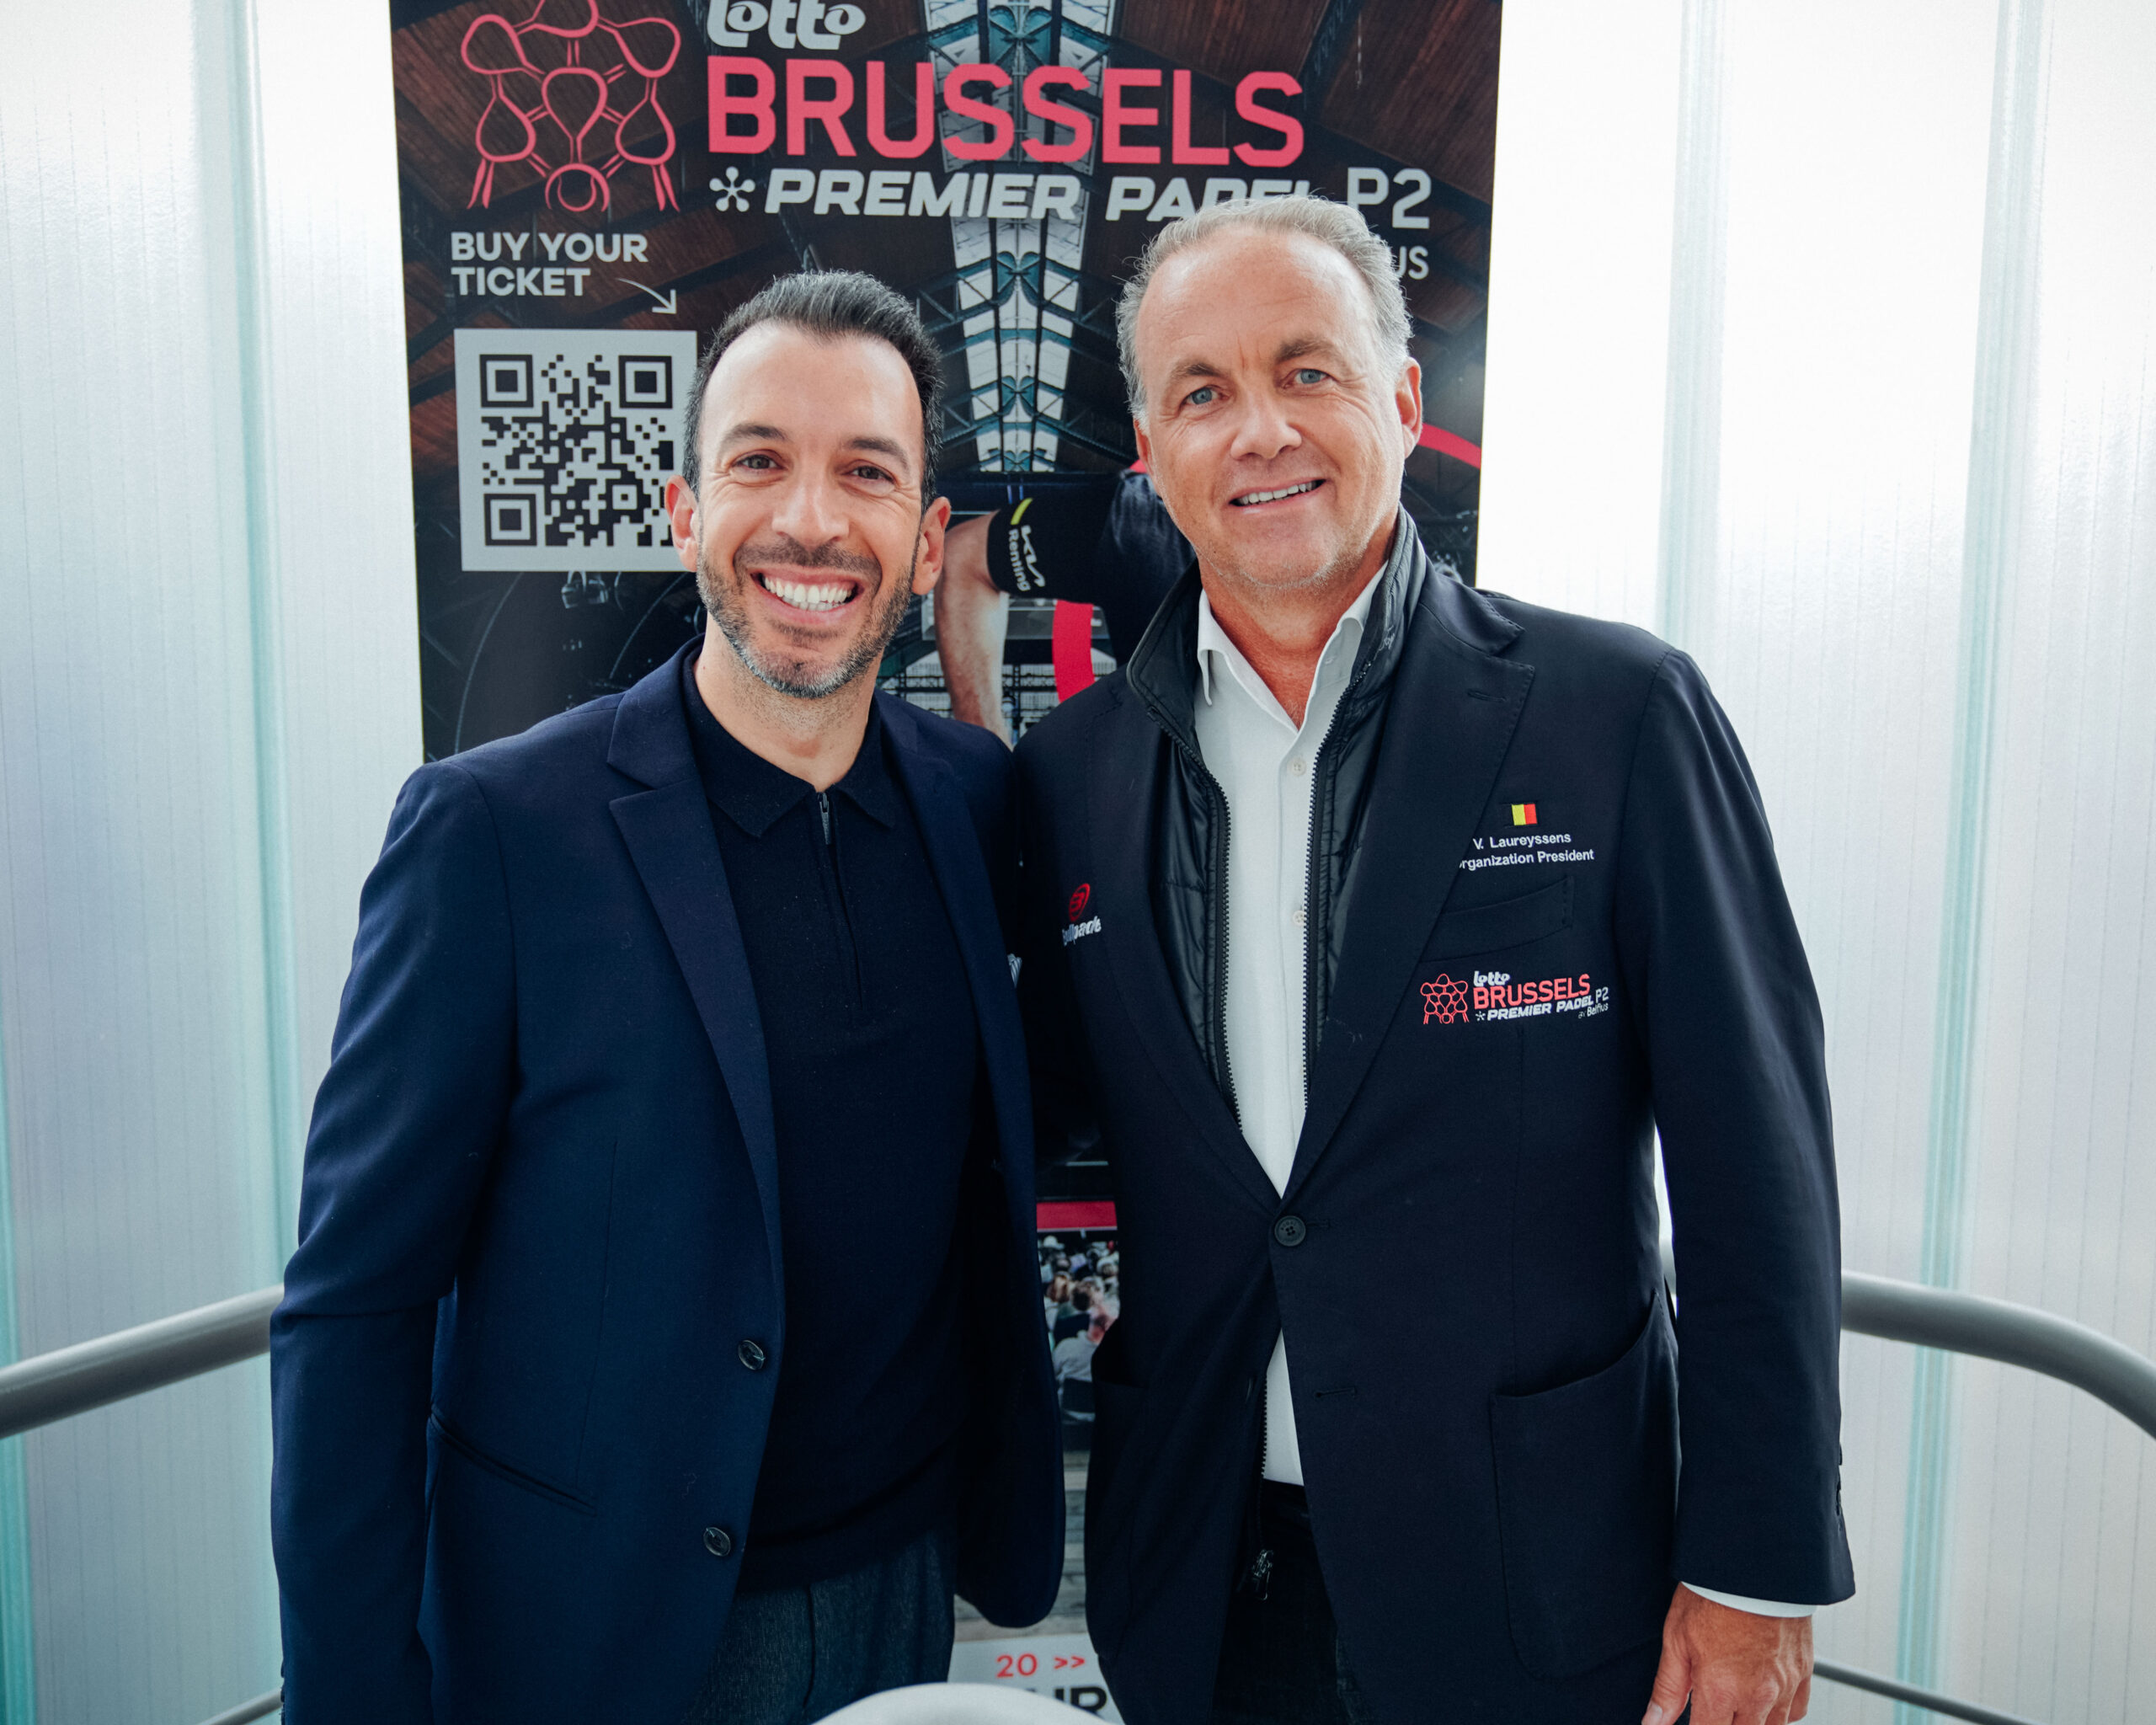 RTL deal with Brussels Premier Padel